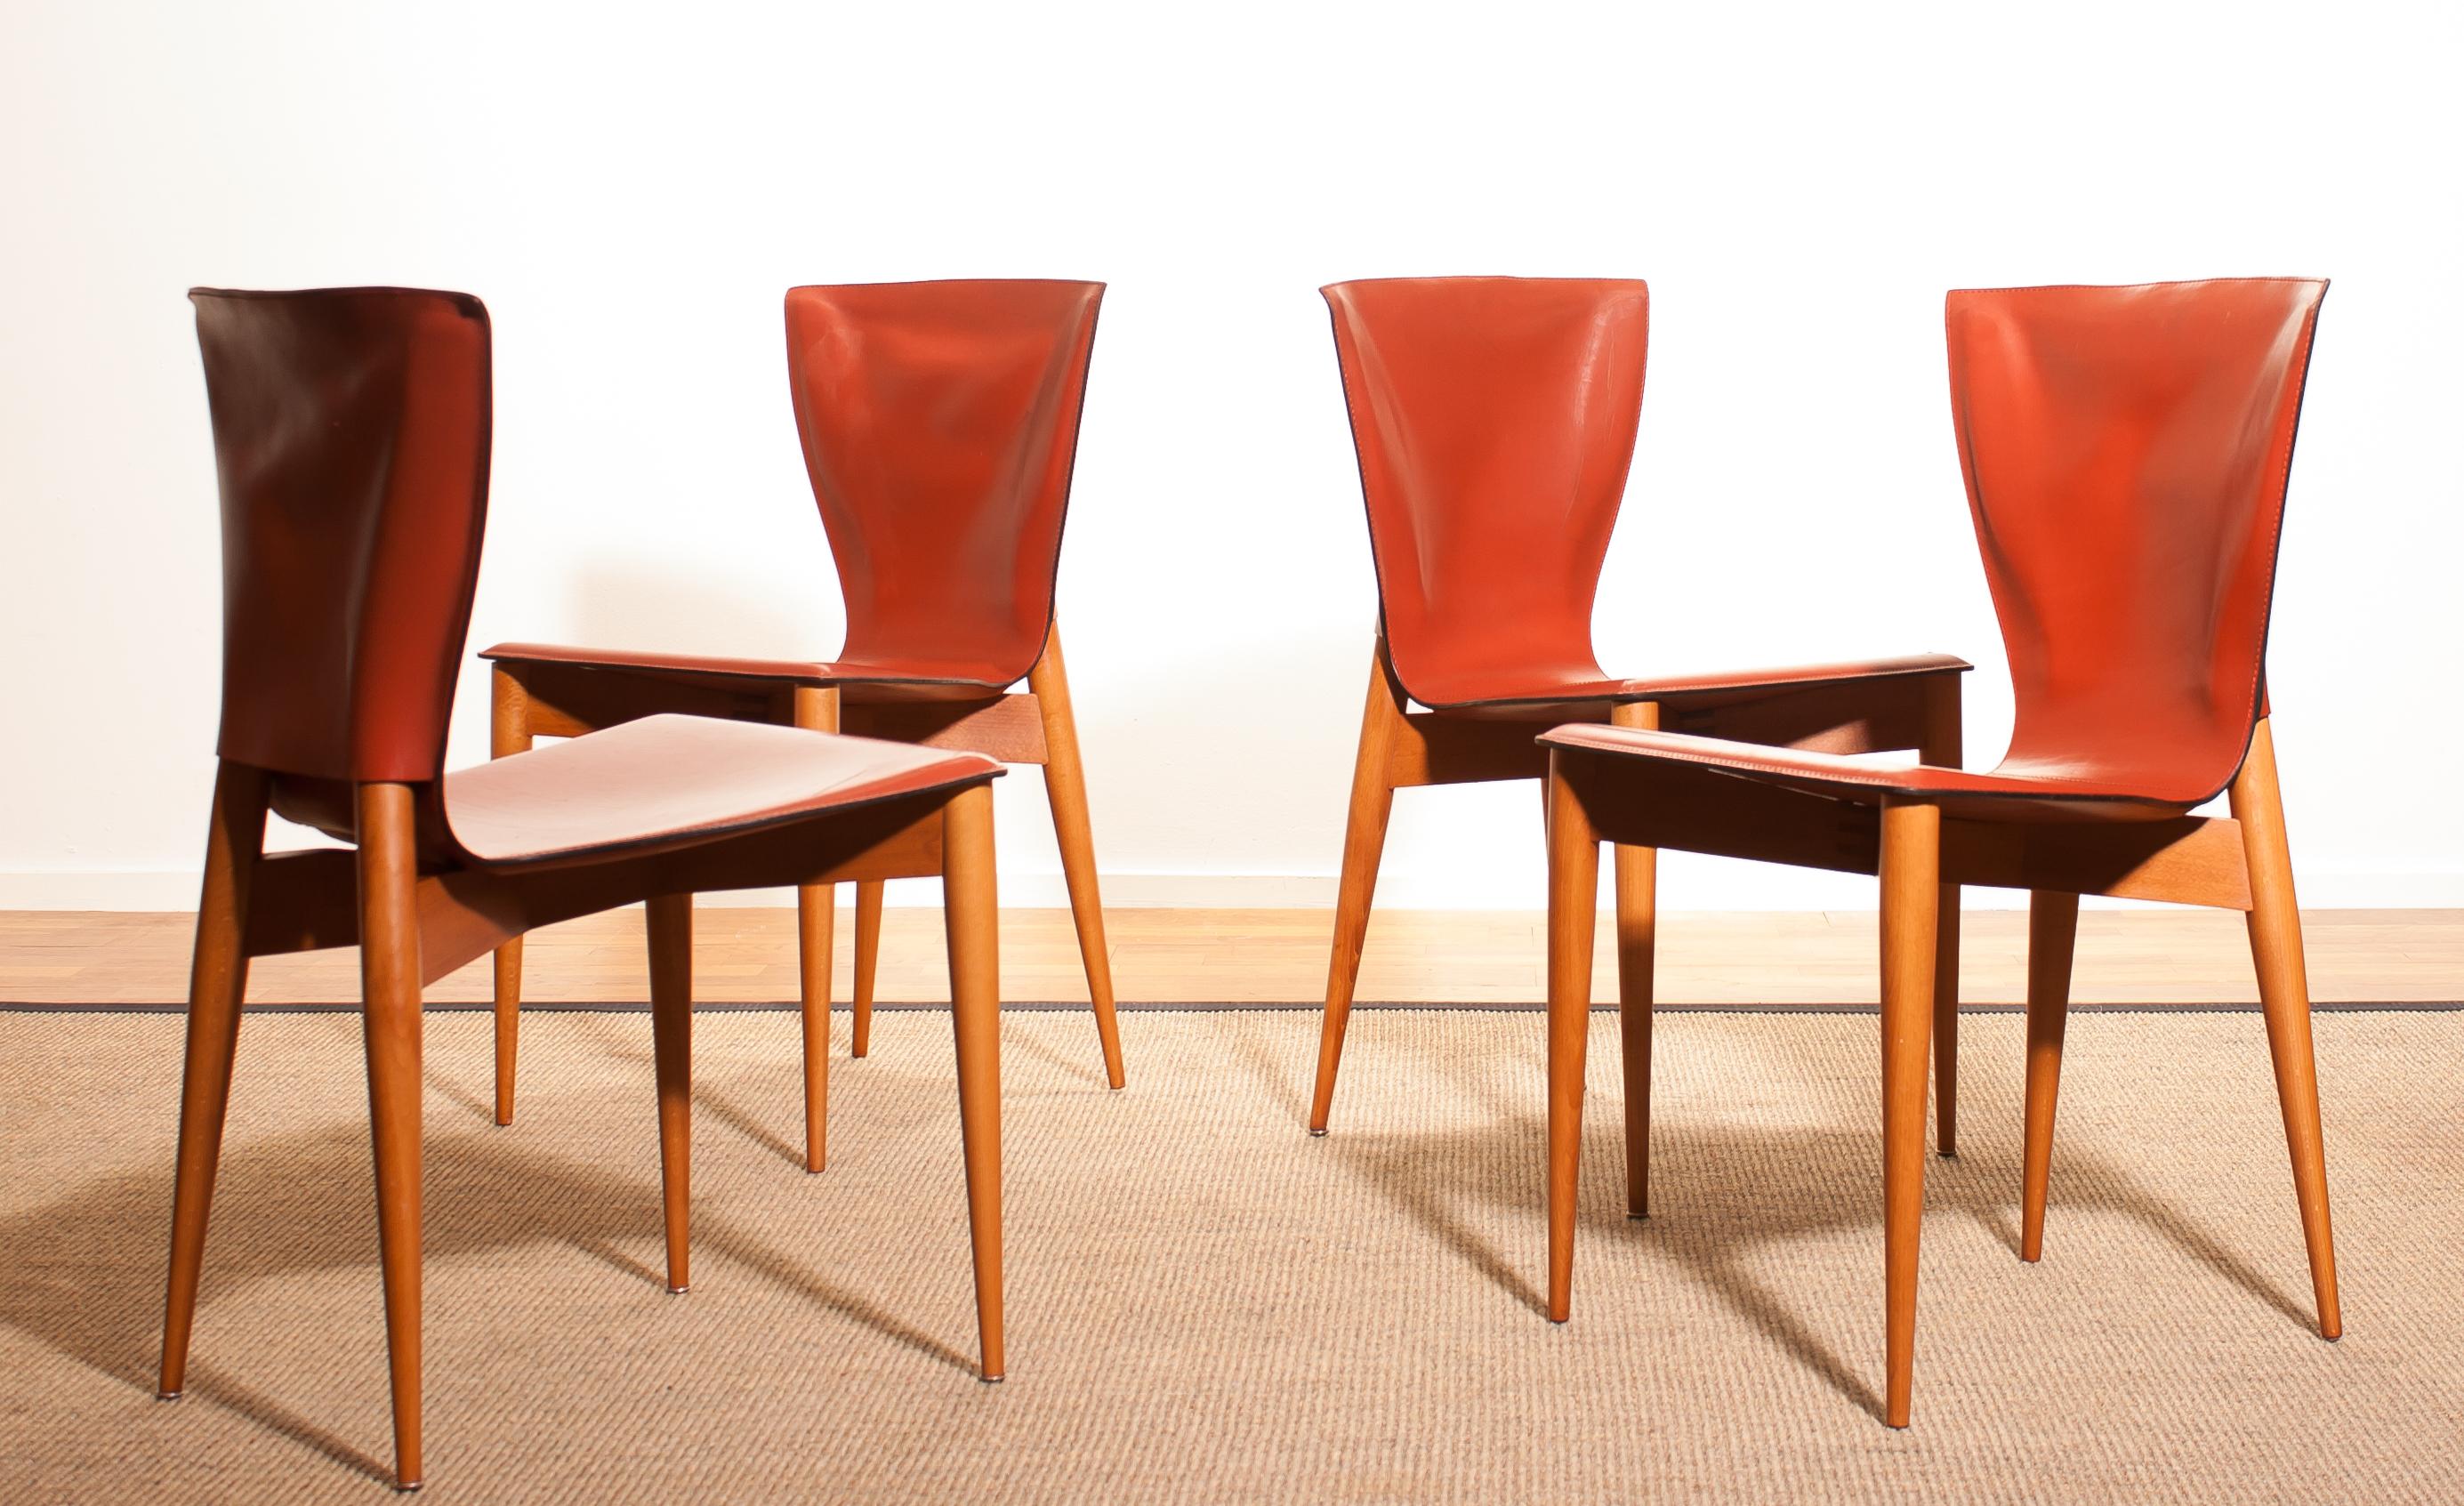 This set of four Mid-Century Modern chairs were designed by Carlo Bartoli and made by Matteo Grassi.
They are made of hardwood frames with cognac brown Italian leather seats and backs.
The set is in a wonderful condition.
Period